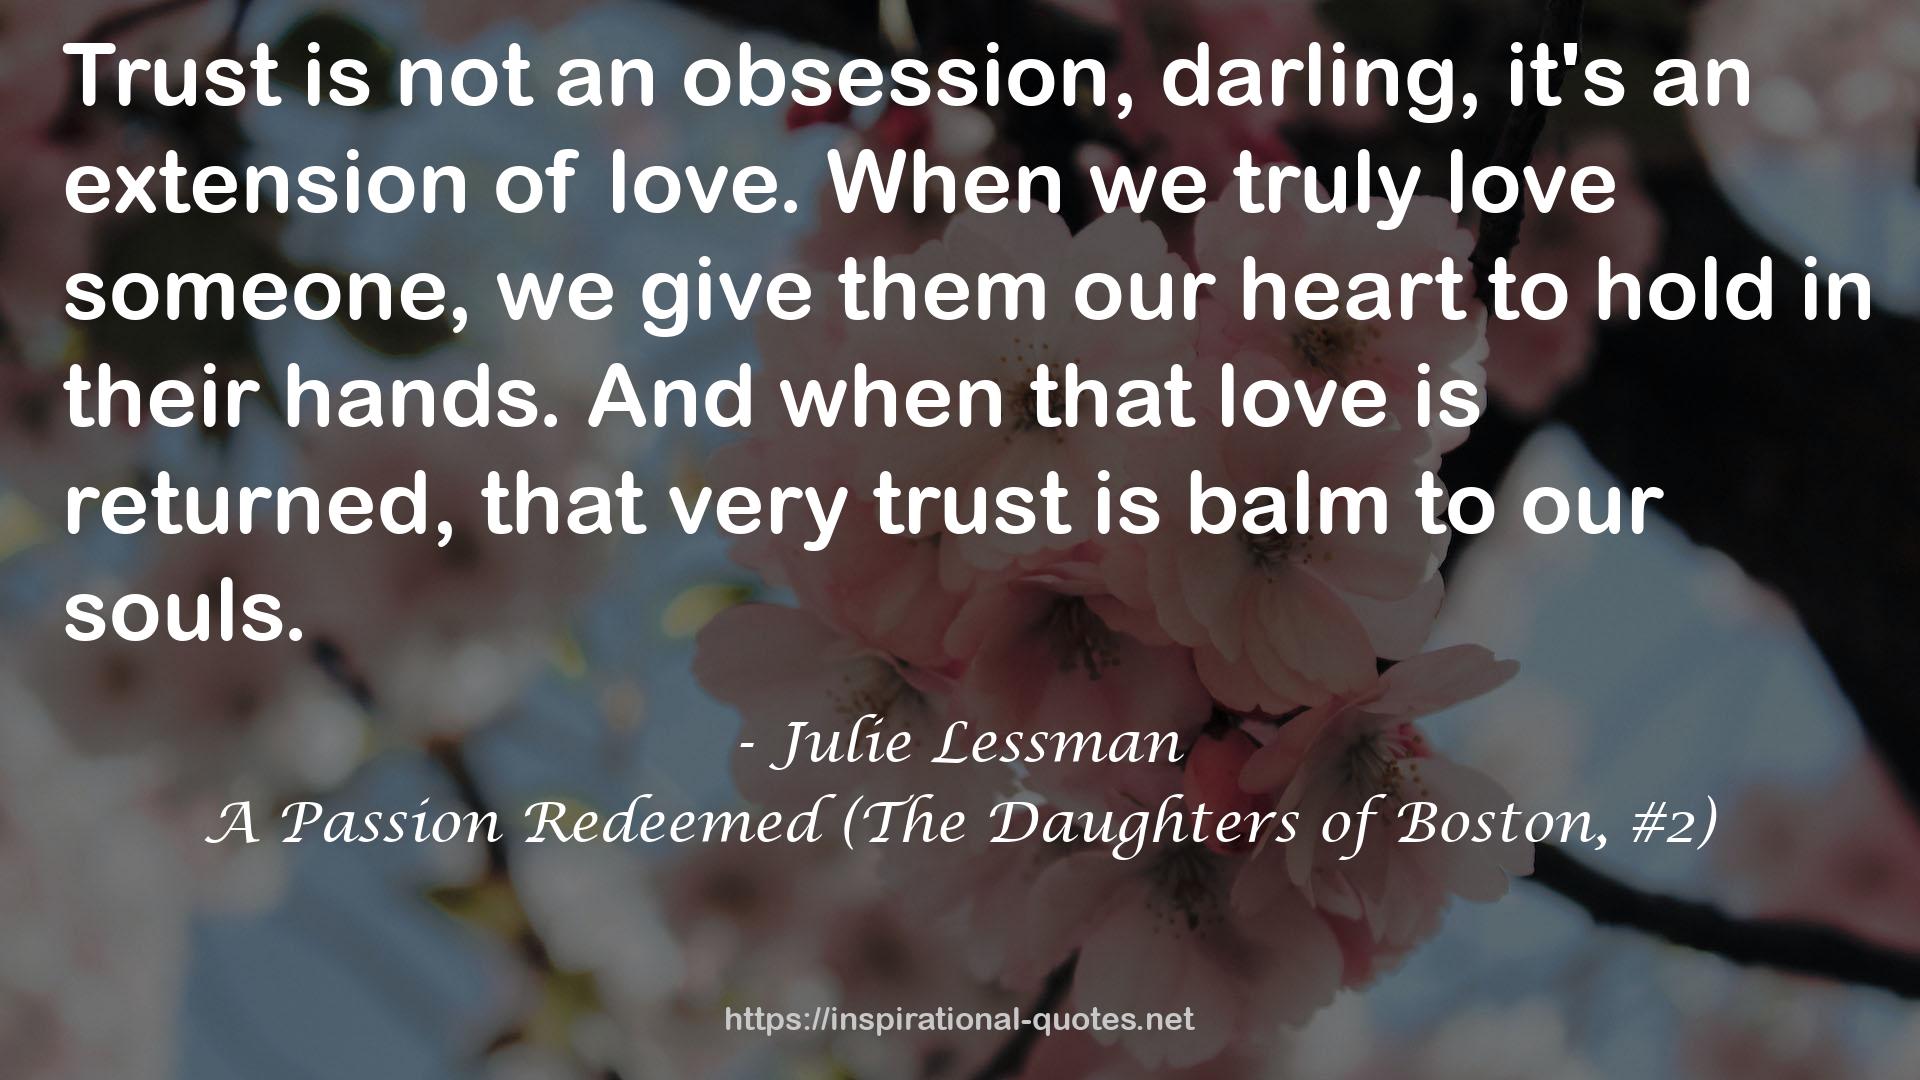 A Passion Redeemed (The Daughters of Boston, #2) QUOTES